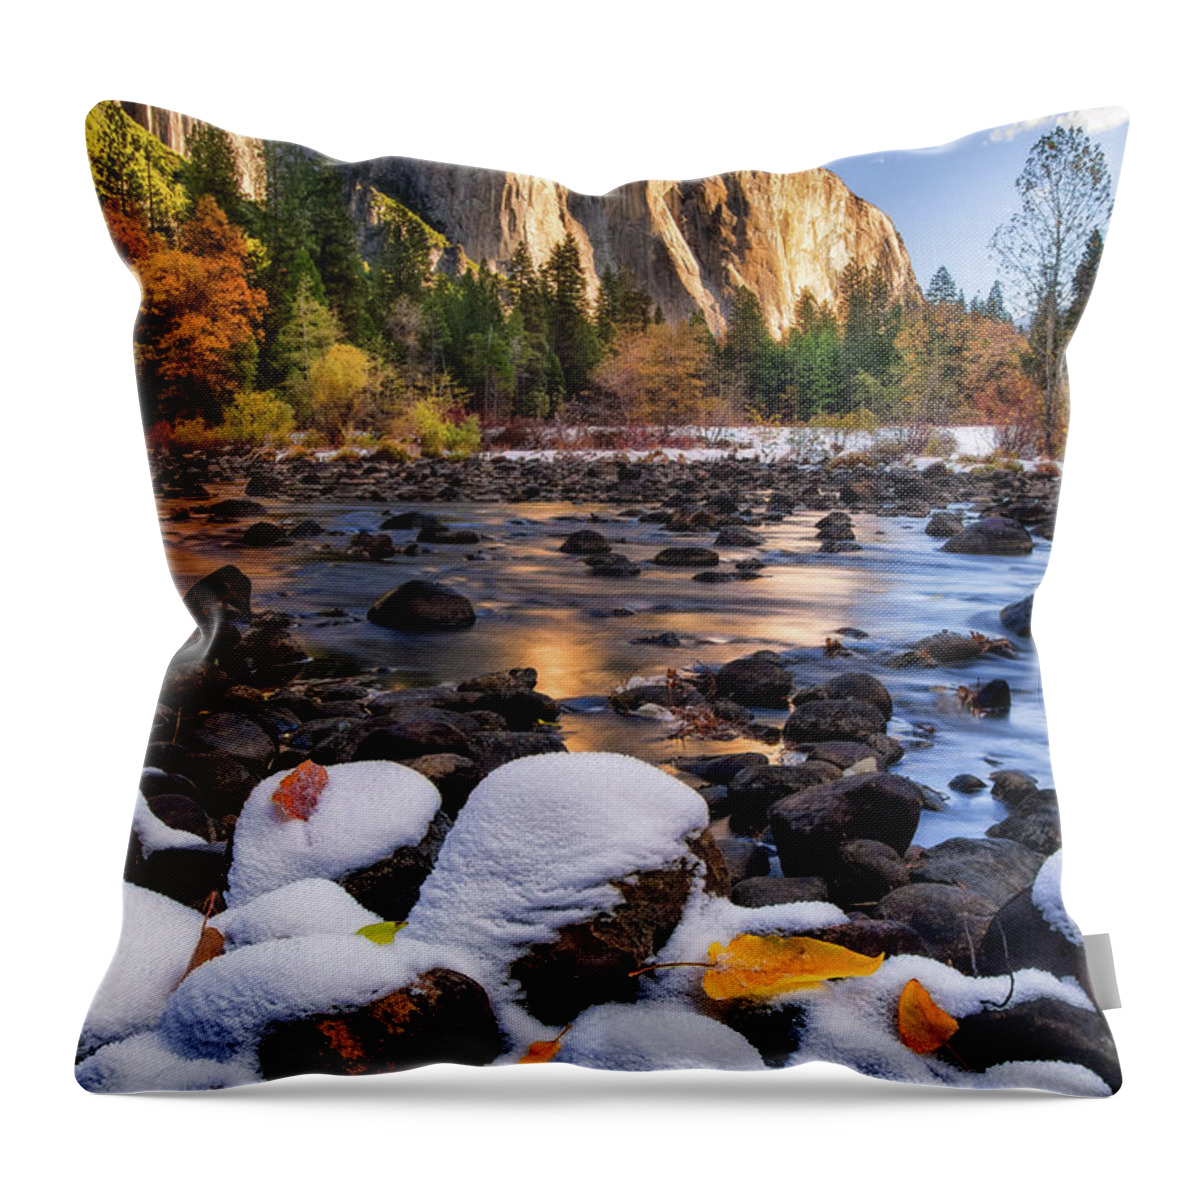 Yosemite Throw Pillow featuring the photograph November Morning by Anthony Michael Bonafede